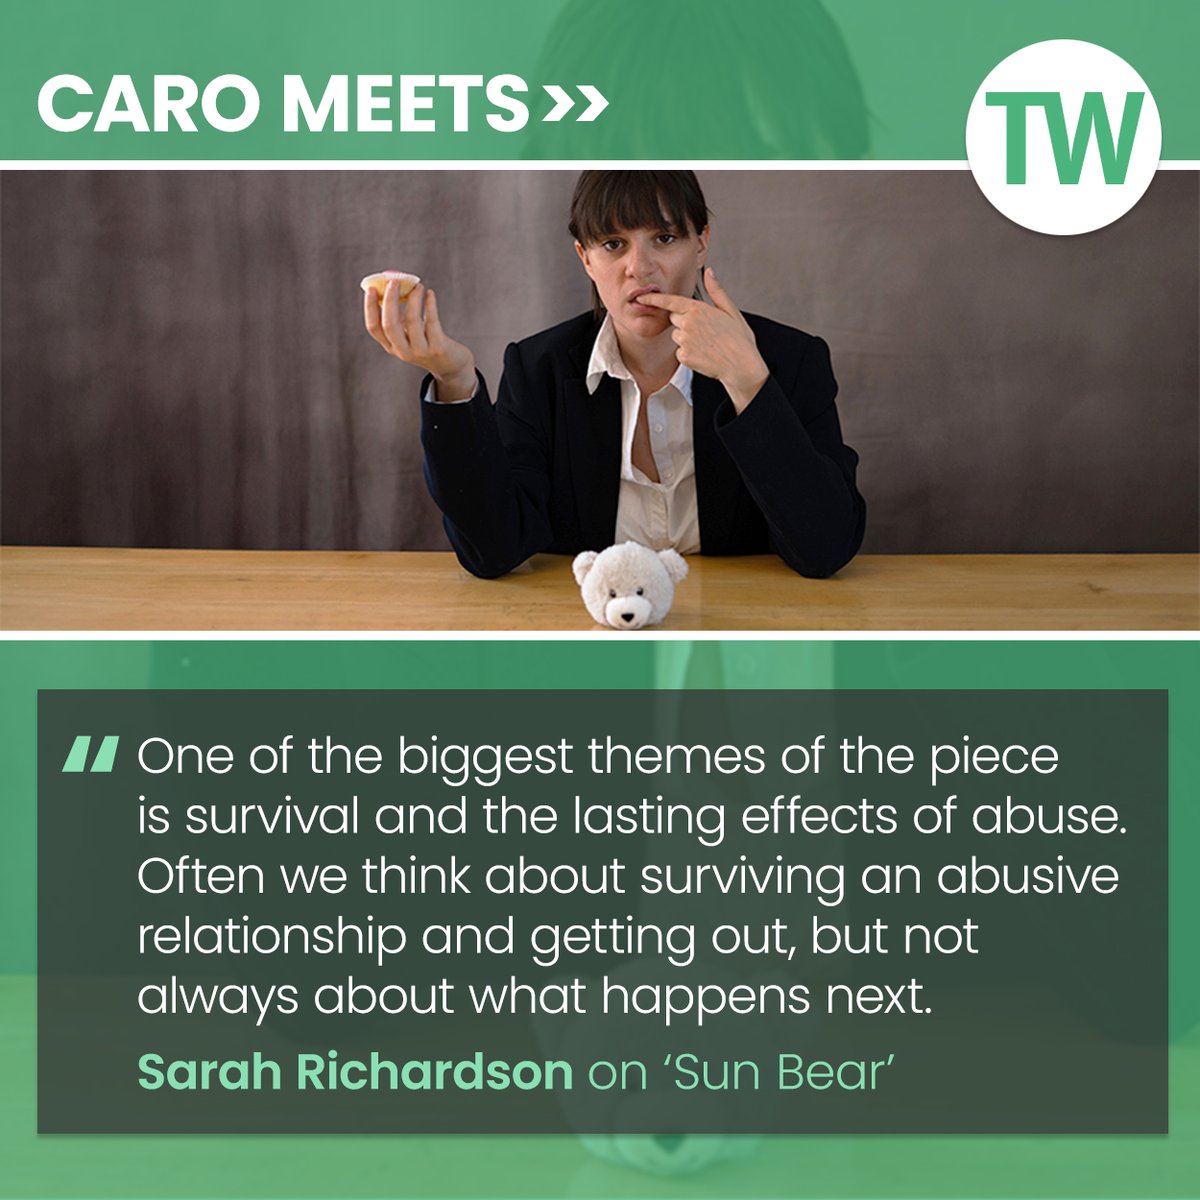 This week's Caro Meets interview is with Sarah Richardson about her show 'Sun Bear' at Park Theatre: bit.ly/43Nxs2f @parktheatre @sarahrichiie